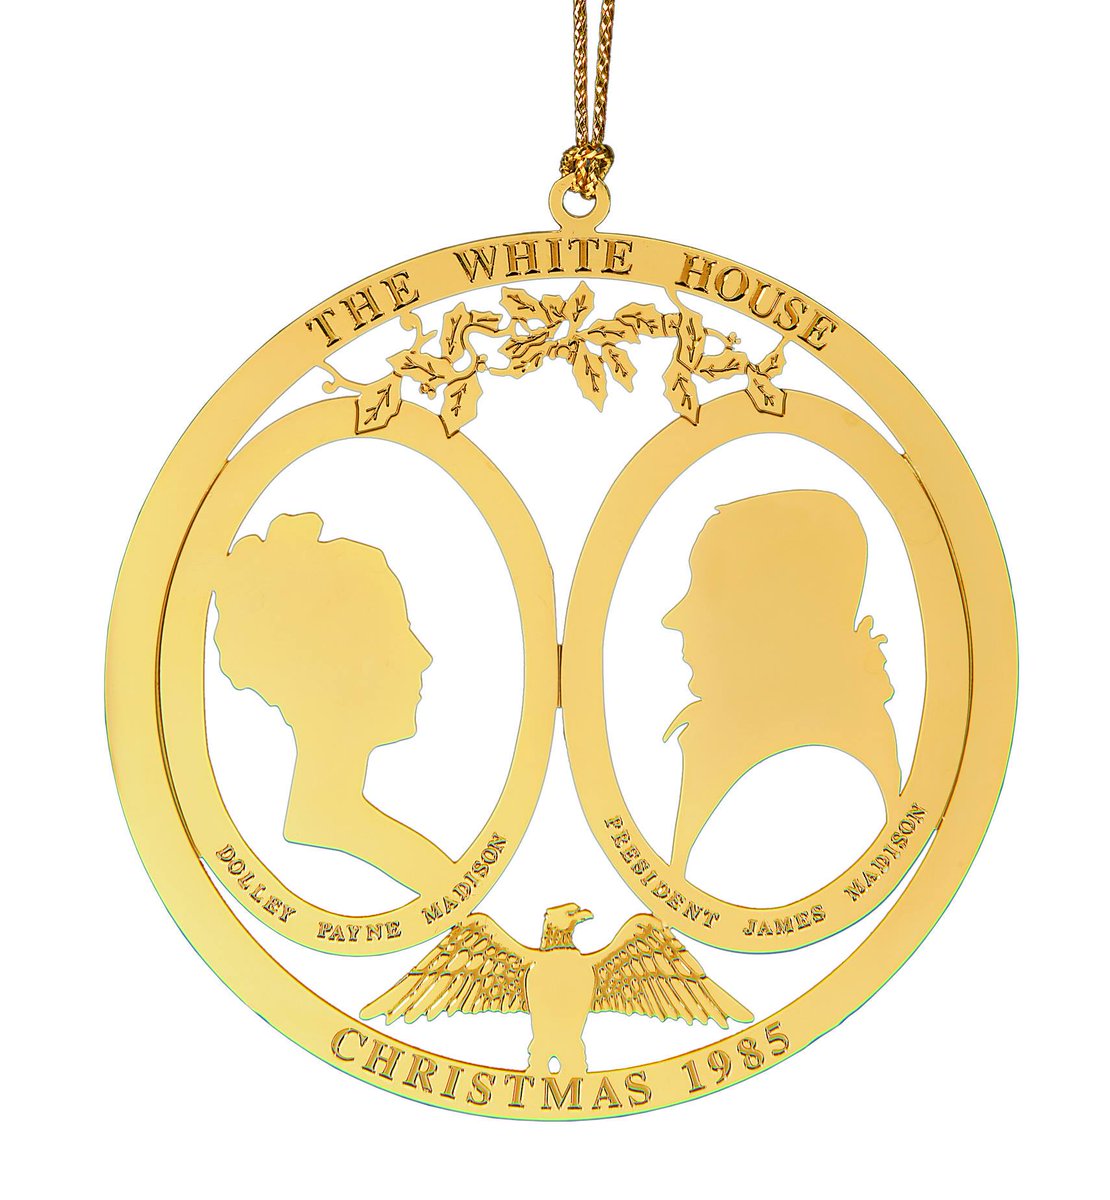 We honored the presidency of James Madison in the 1985 ornament. The piece features silhouettes of the President and First Lady Dolley Madison, famous for helping to save the portrait of George Washington when the British burned the White House in 1814. https://shop.whitehousehistory.org/1985-1988-four-white-house-ornaments-sold-as-a-set